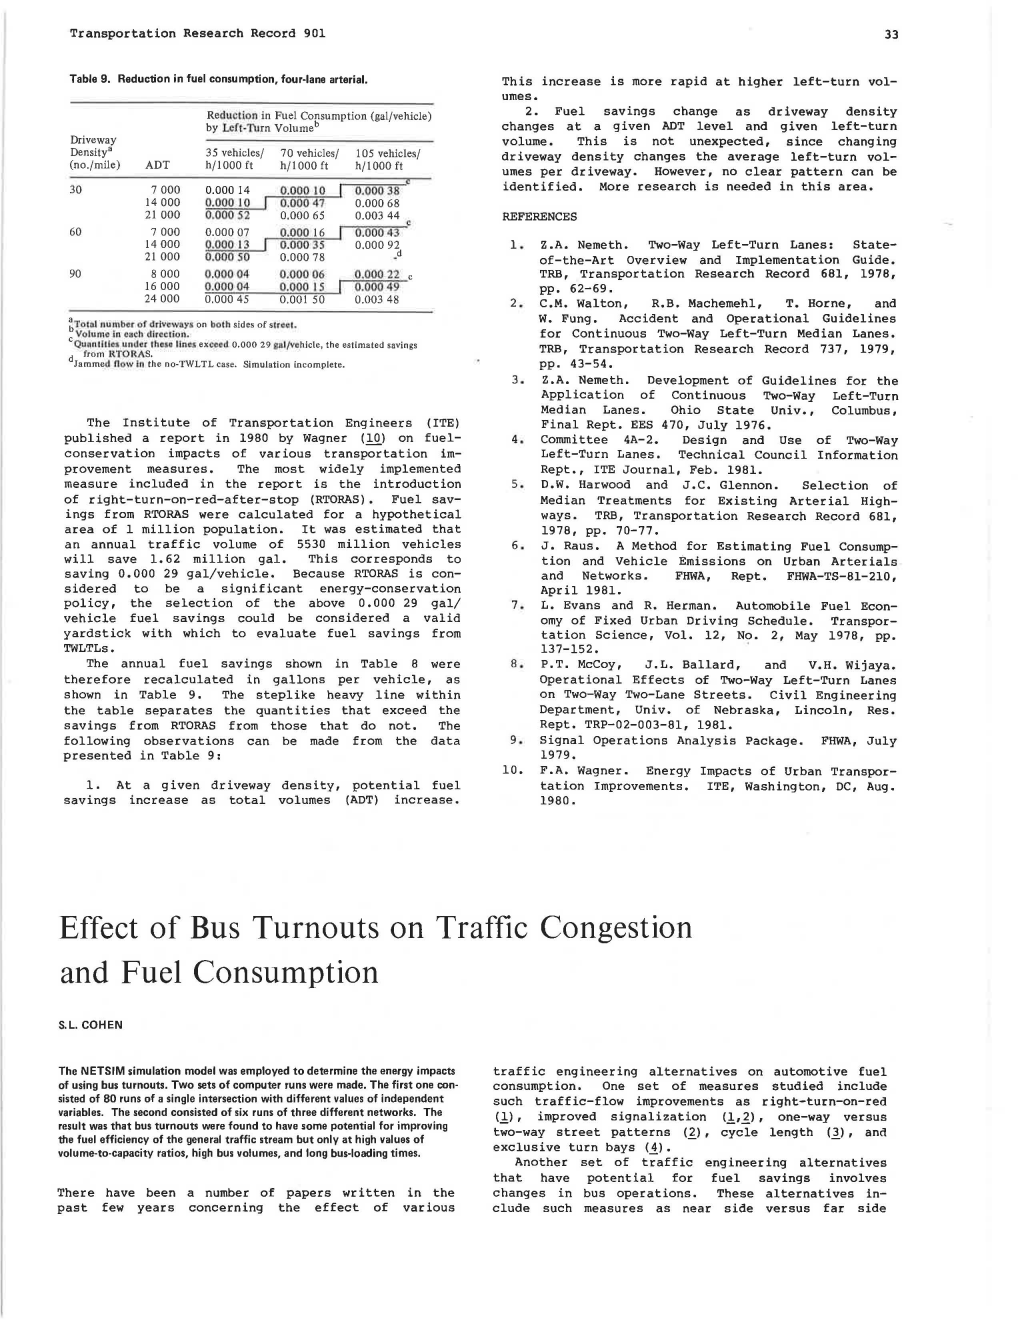 Effect of Bus Turnouts on Traffic Congestion and Fuel Consumption